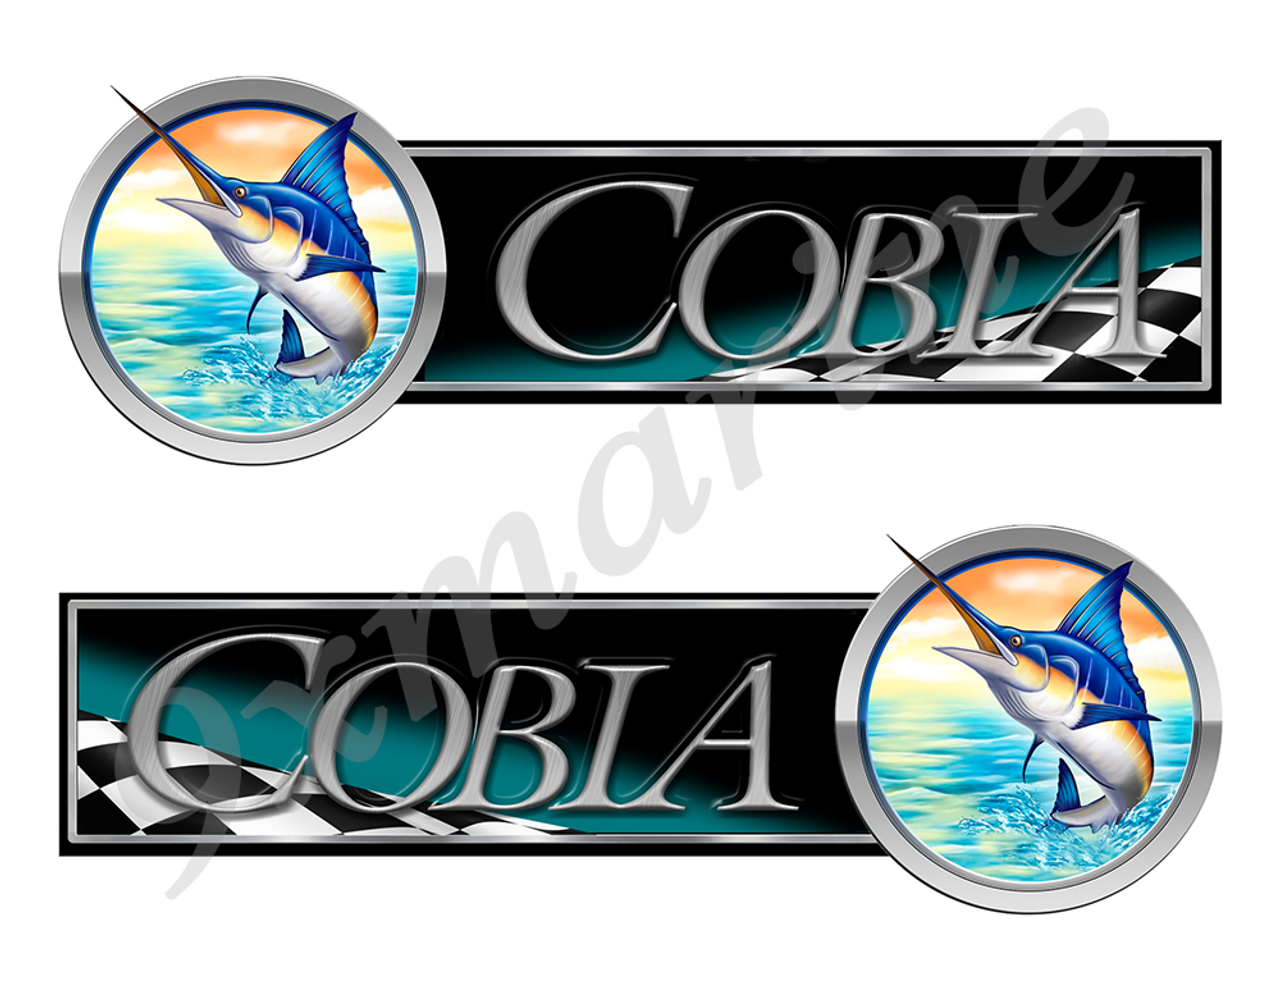 2 Cobia Boat Marlin Racing Type Stickers